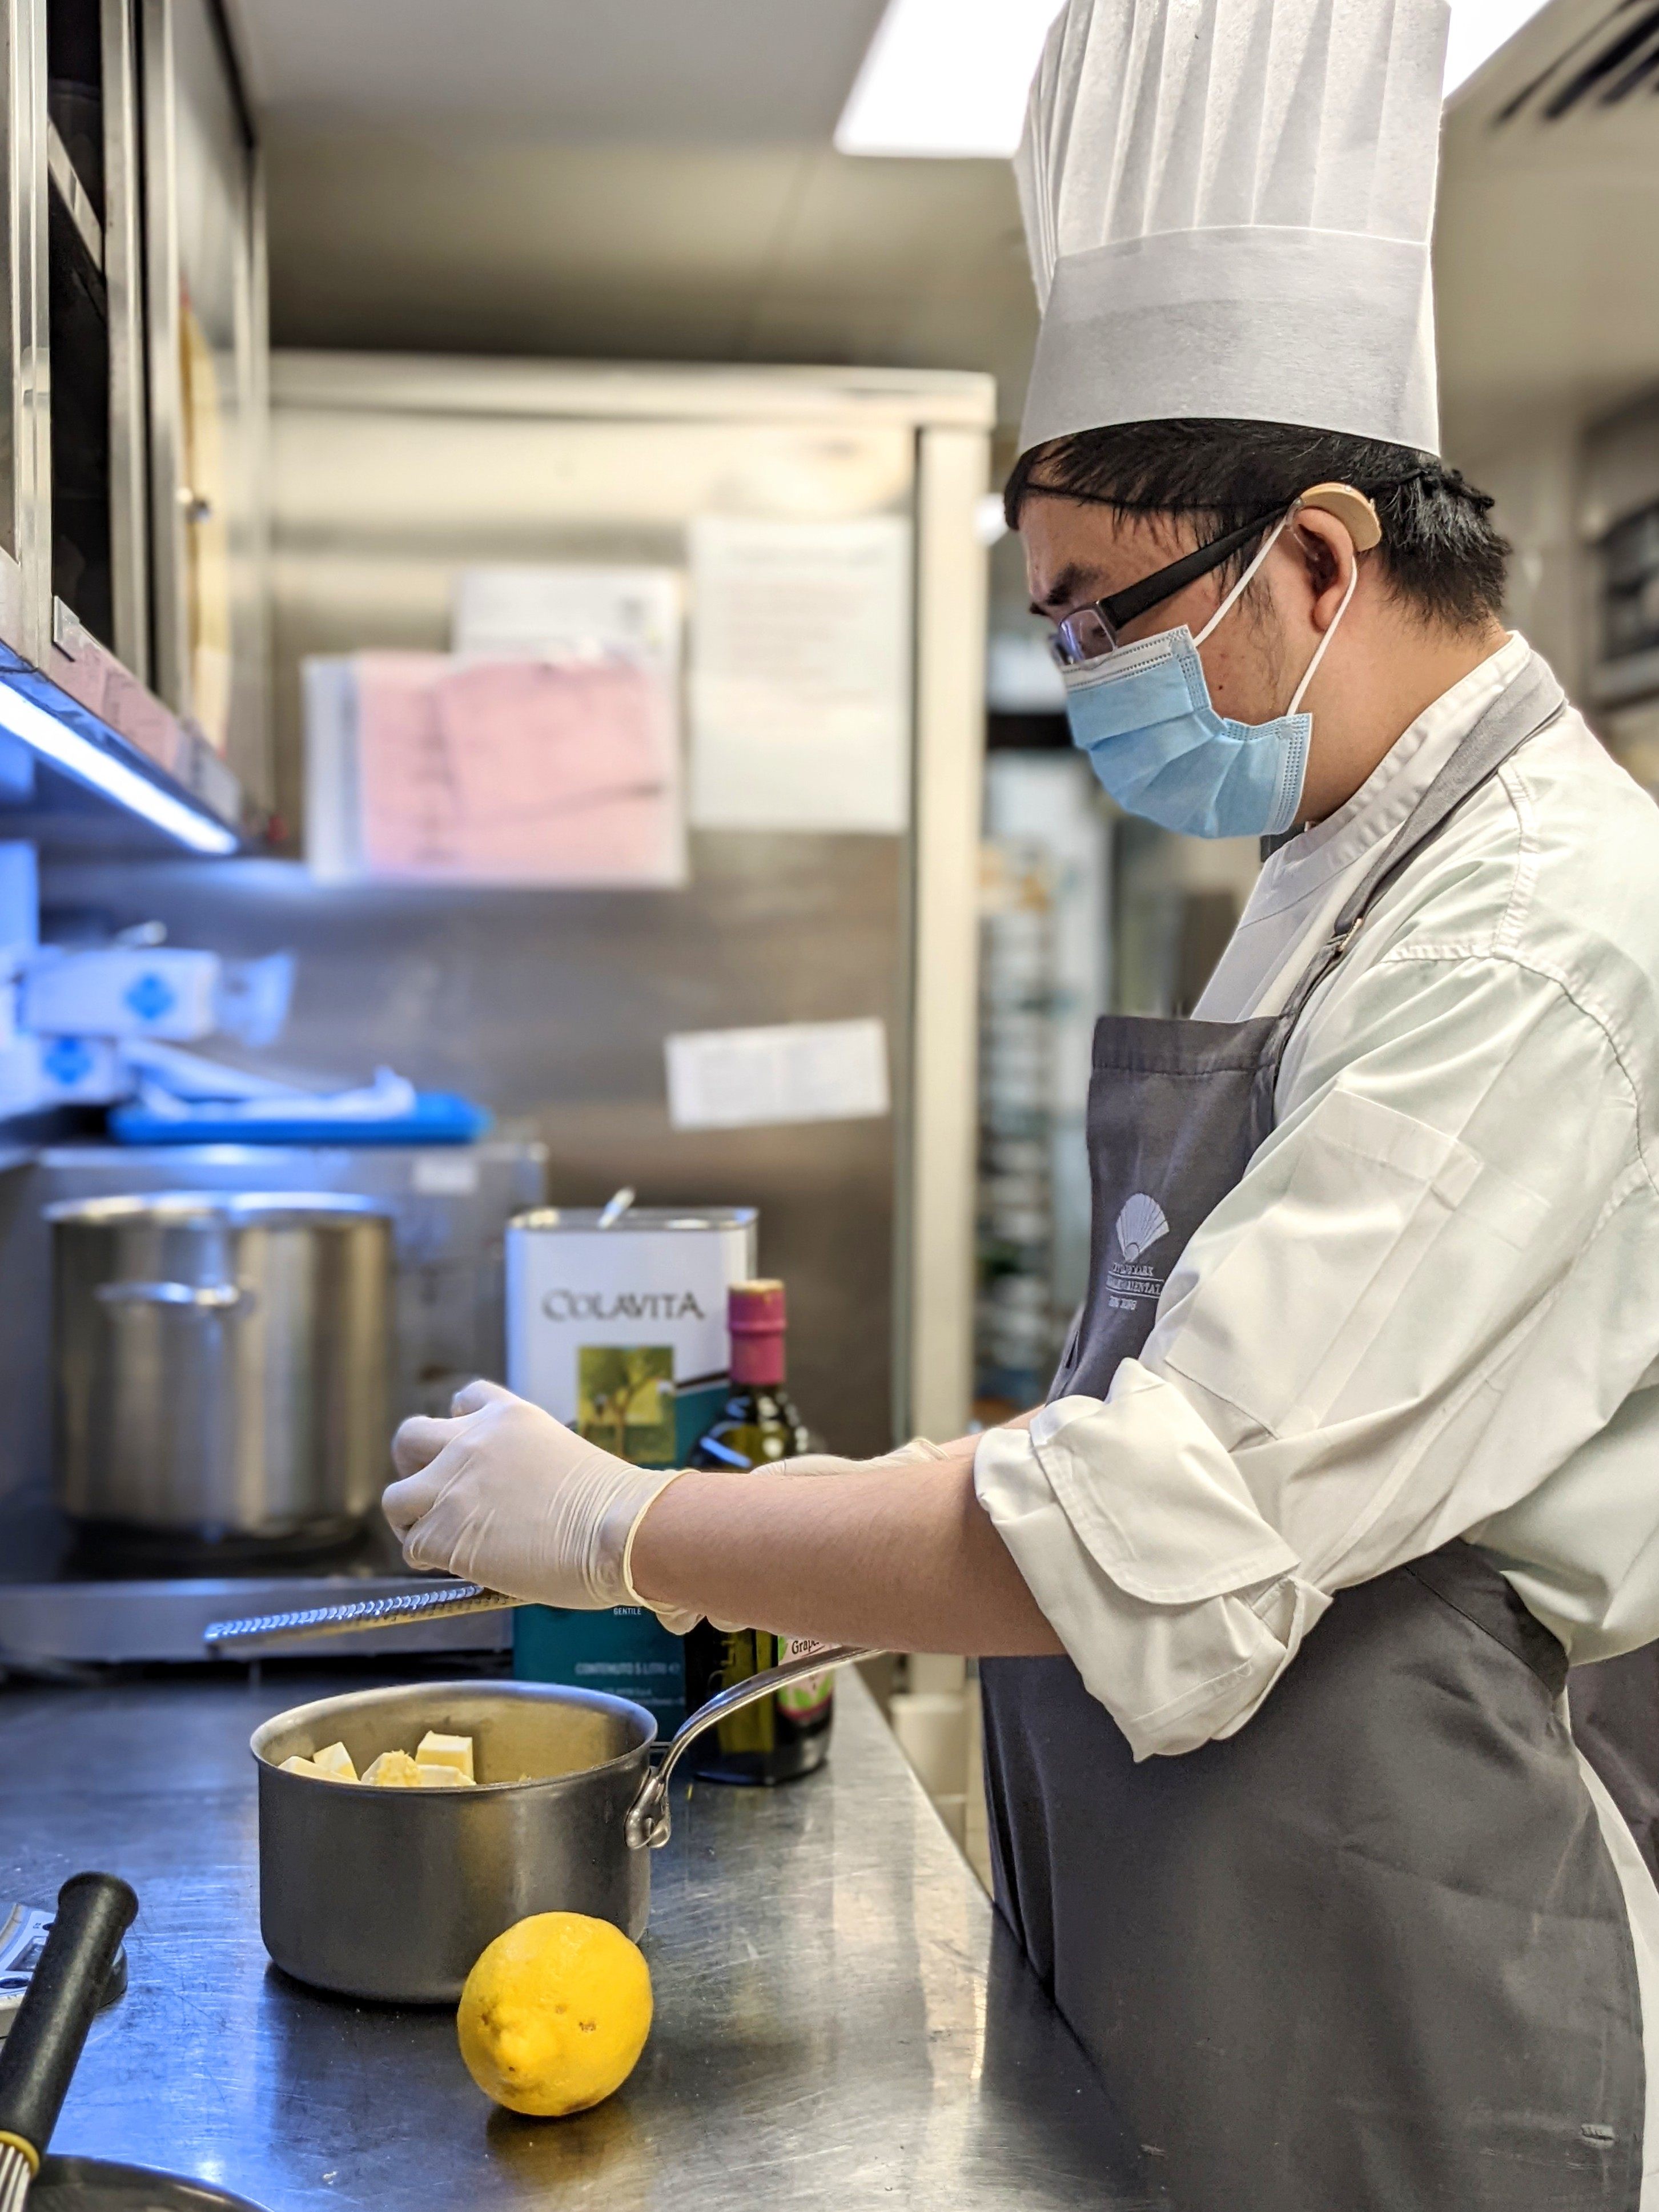 After taking cooking courses offered by the Shine Skills Centre, Gu Shi-yi realised that his life goal was to work in a kitchen. Photo: The Landmark Mandarin Oriental